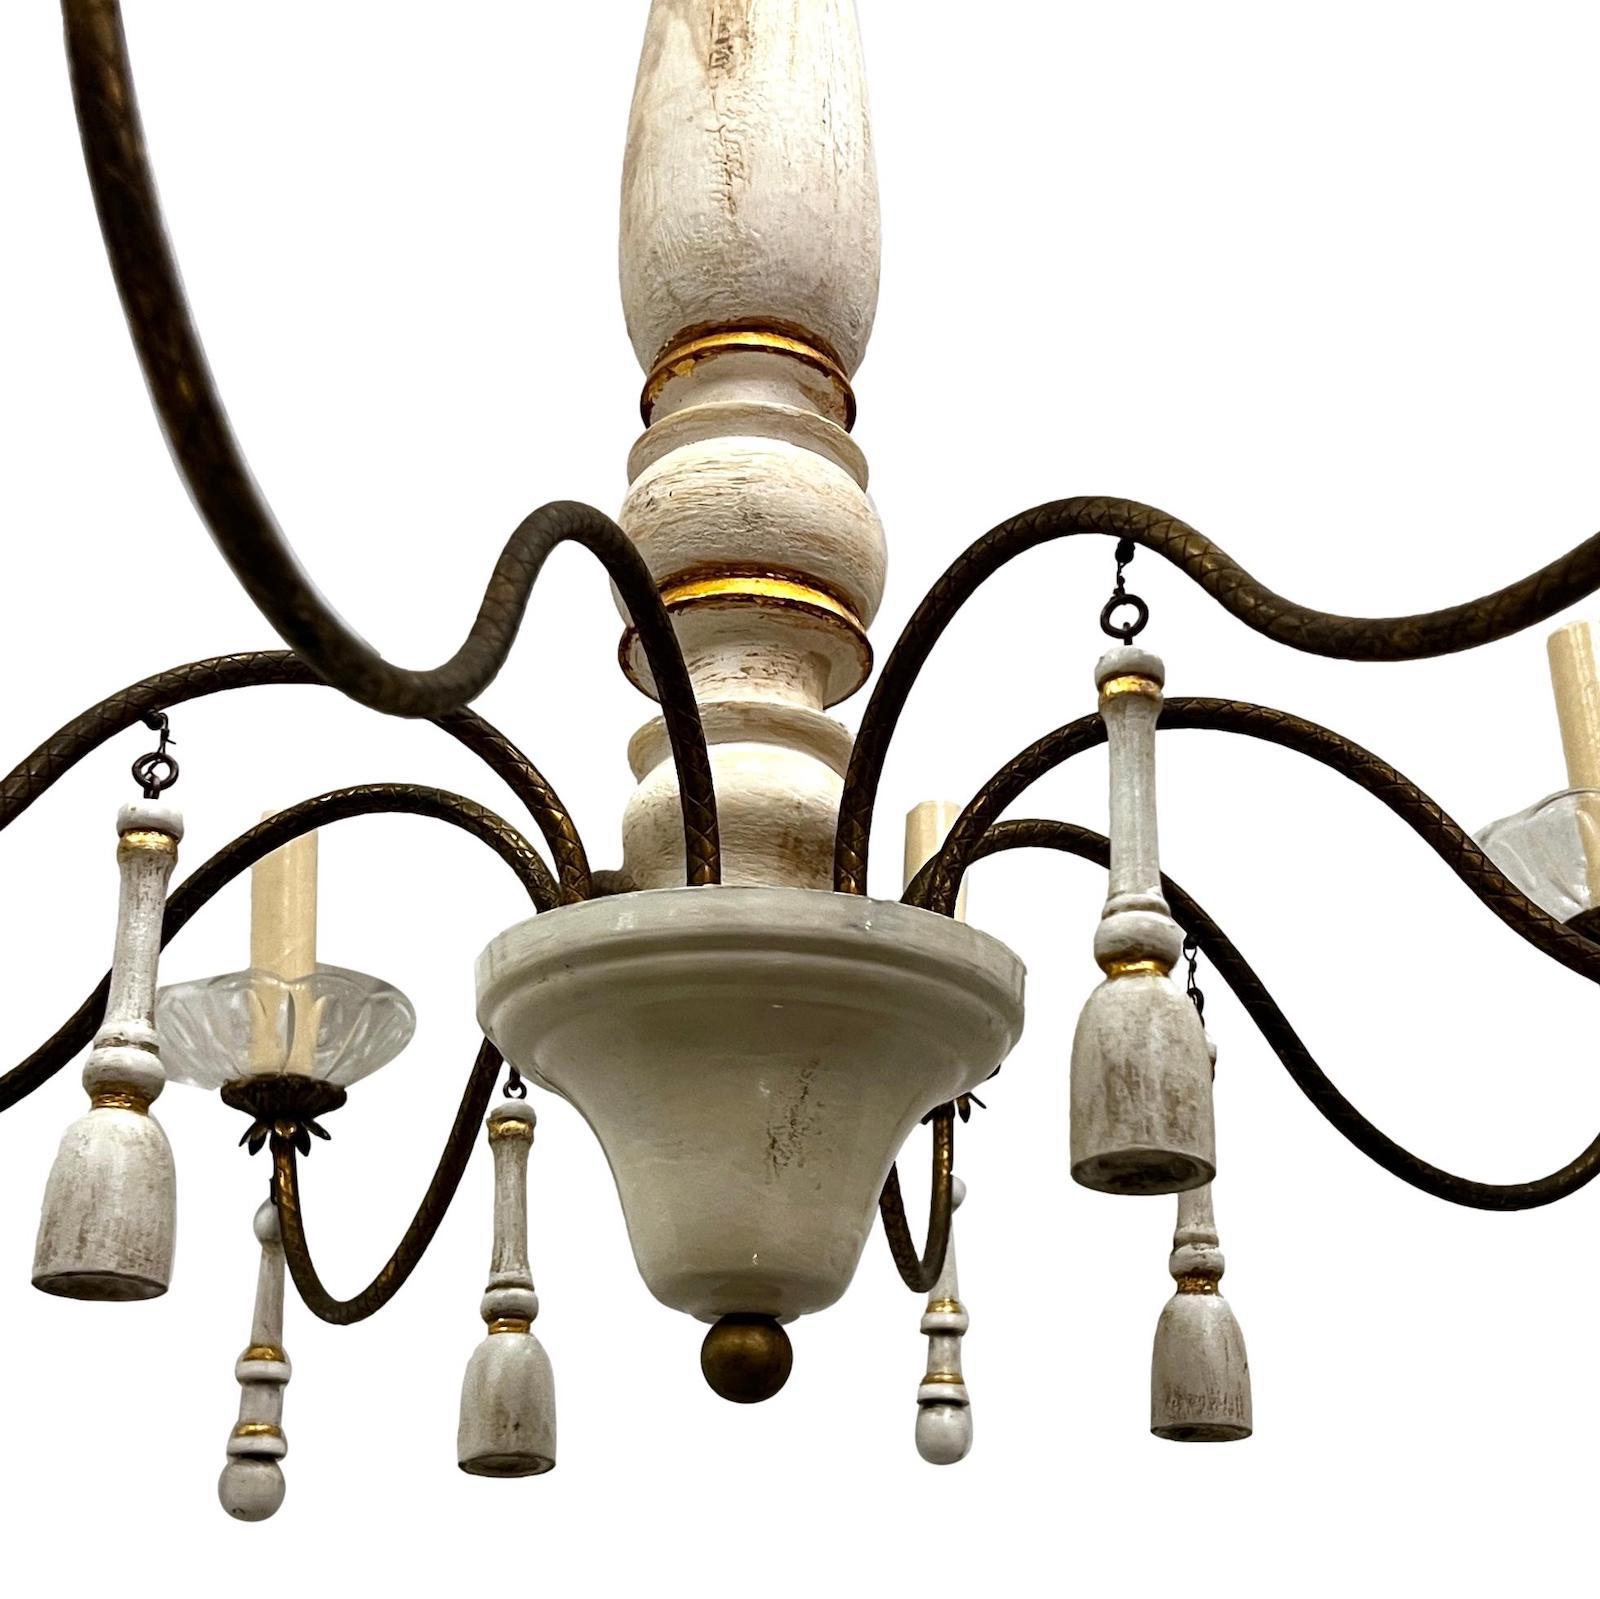 Italian circa 1940s eight-arm wooden chandelier with painted finished, carved wood tassels and crystal bobeches.

Measurements:
Minimum drop: 34